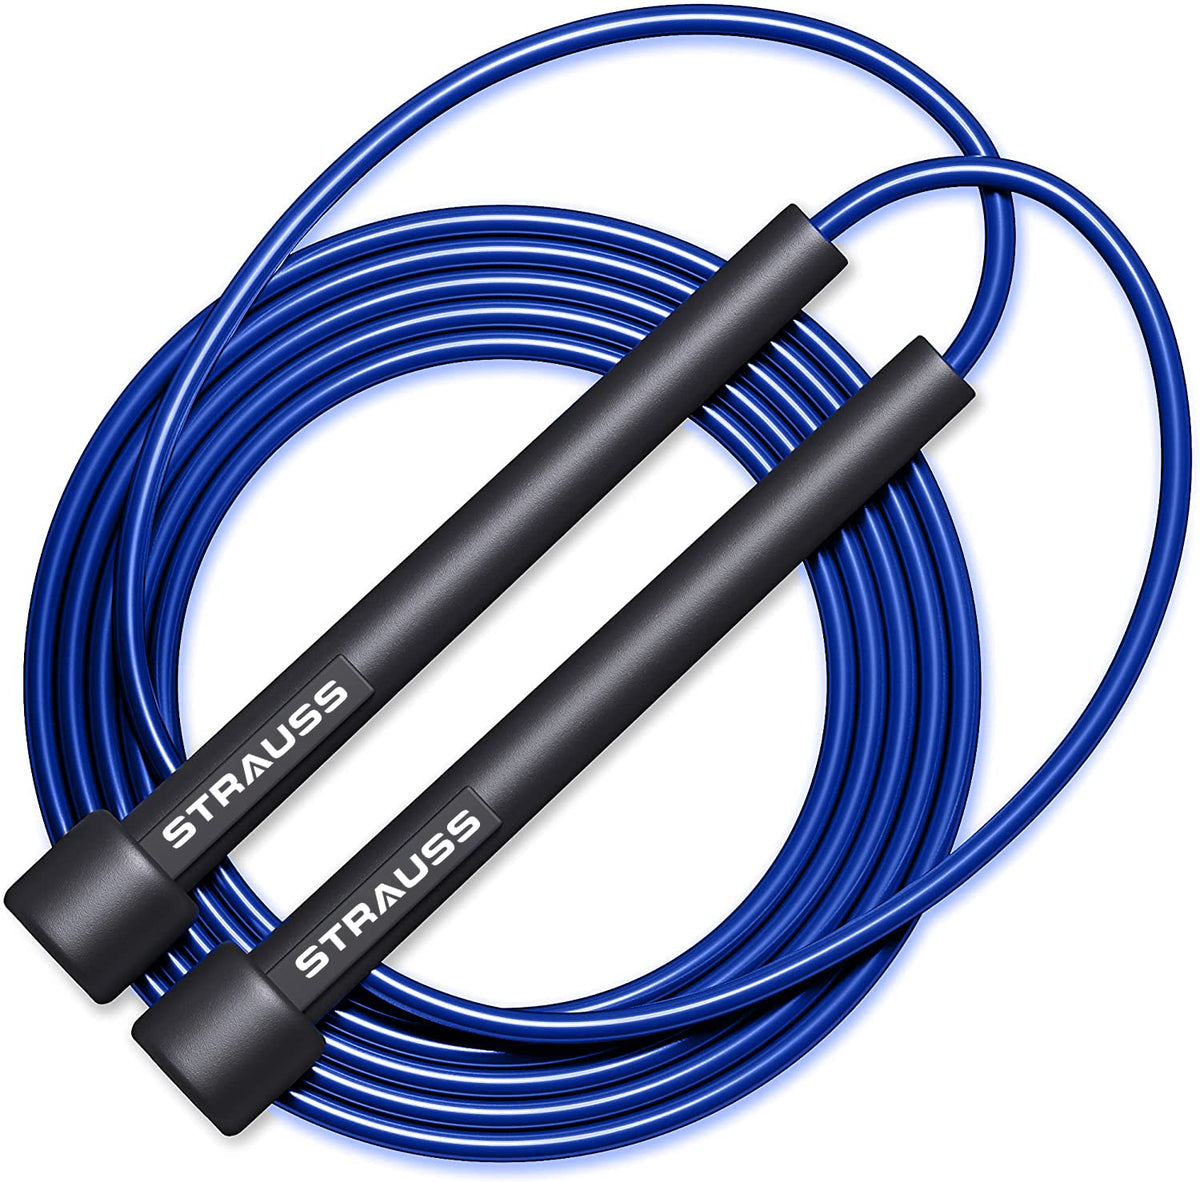 Strauss Speed Skipping Rope for Men and Women | Jumping Rope With Adjustable Height | Sports Fitness Adjustable Jump Rope | Speed Skipping Rope for Exercise & Gym, (Blue)